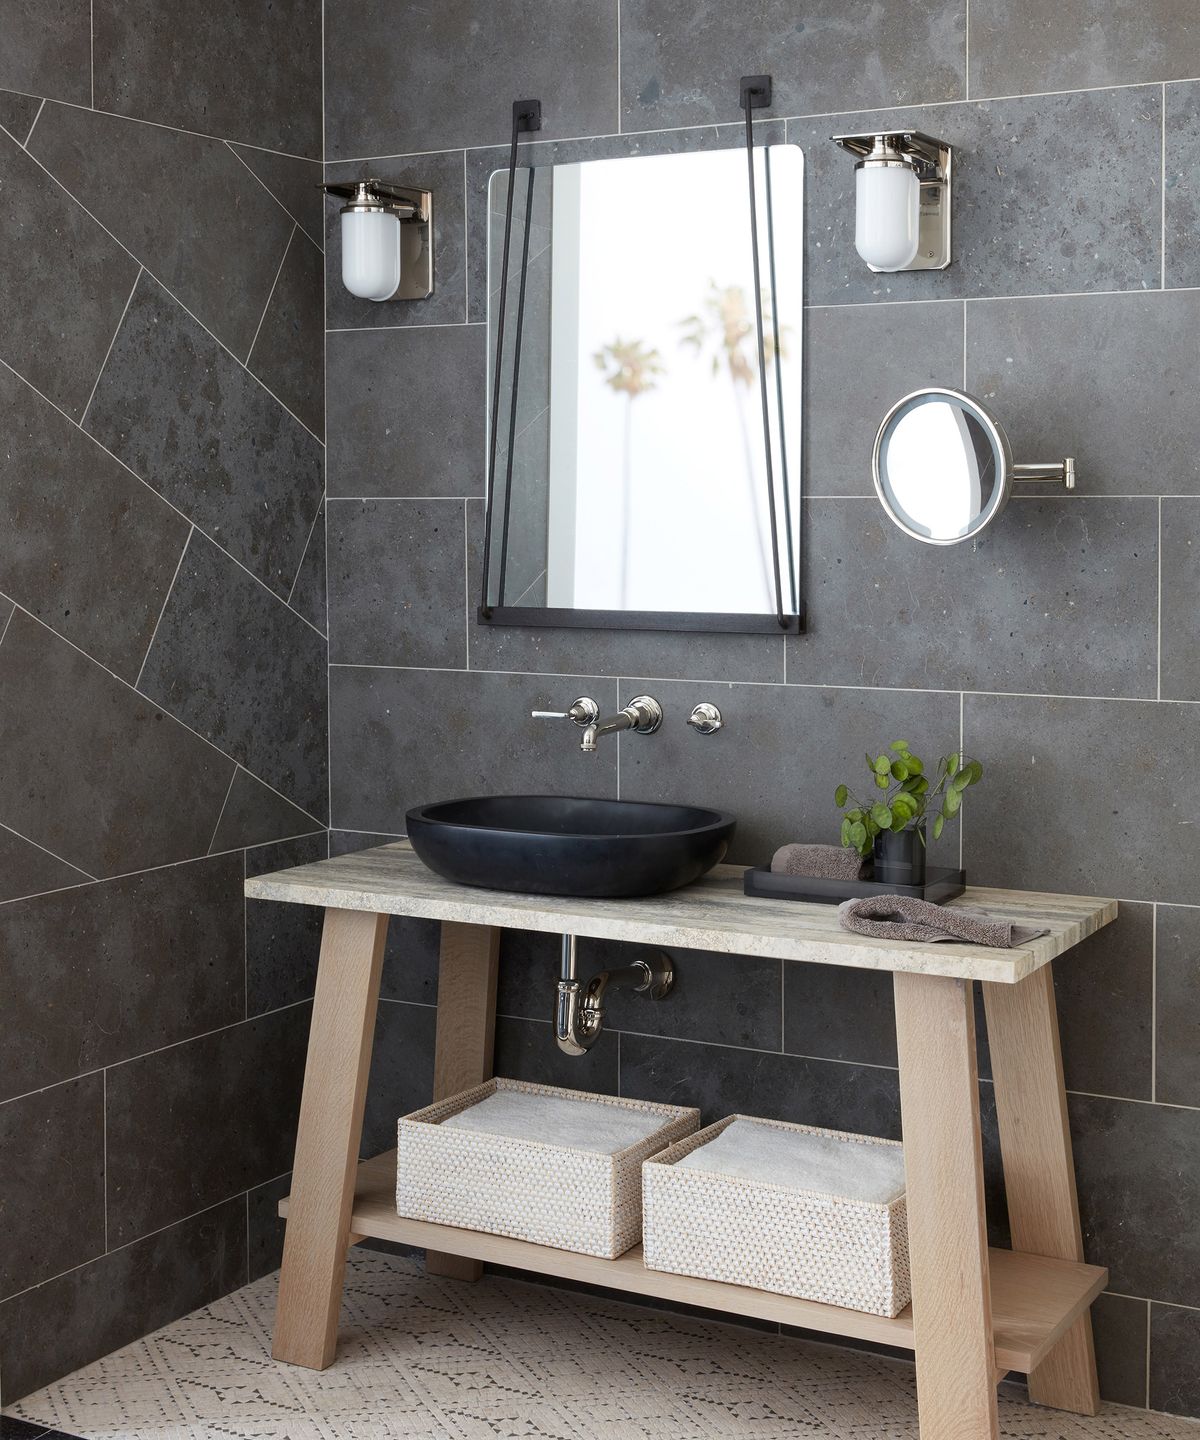 12 Small Bathroom Tile Ideas Elegant Tile Designs Perfect For Compact Spaces Homes Gardens